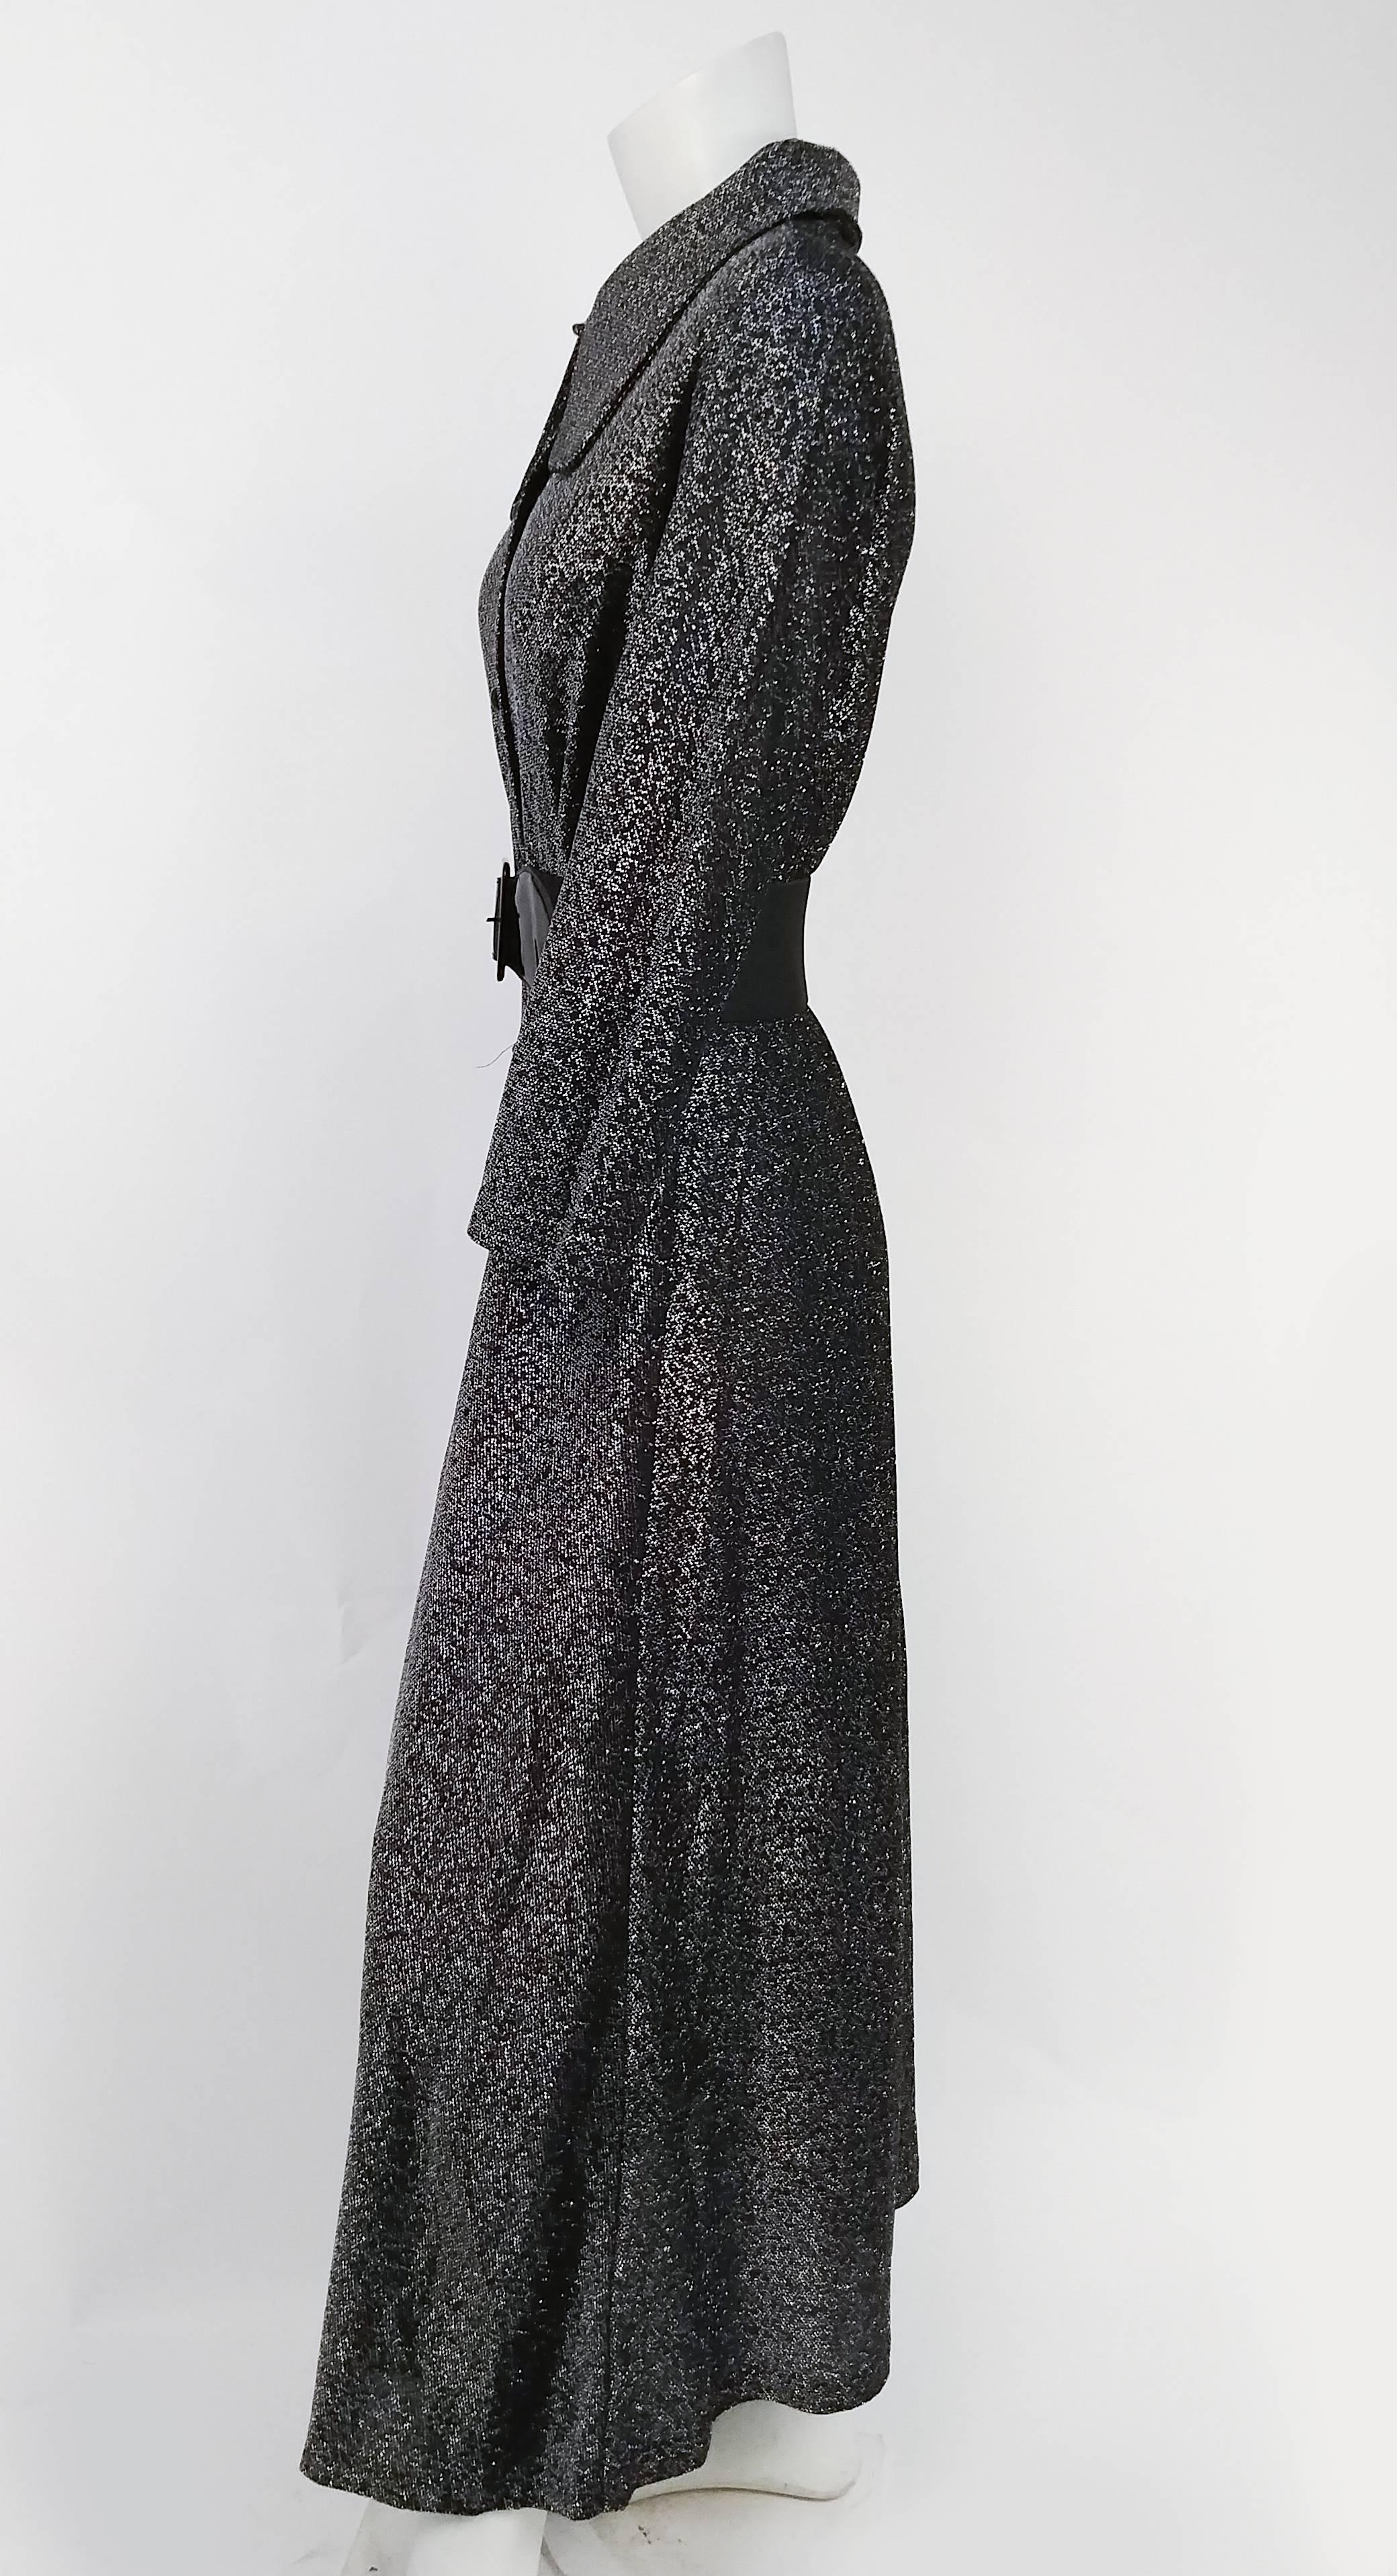 1970s Disco Studio 54 Lamé Black Maxi Dress. Classic large collar. Buttons up front with rhinestone buttons. Wide belt included, not original. 